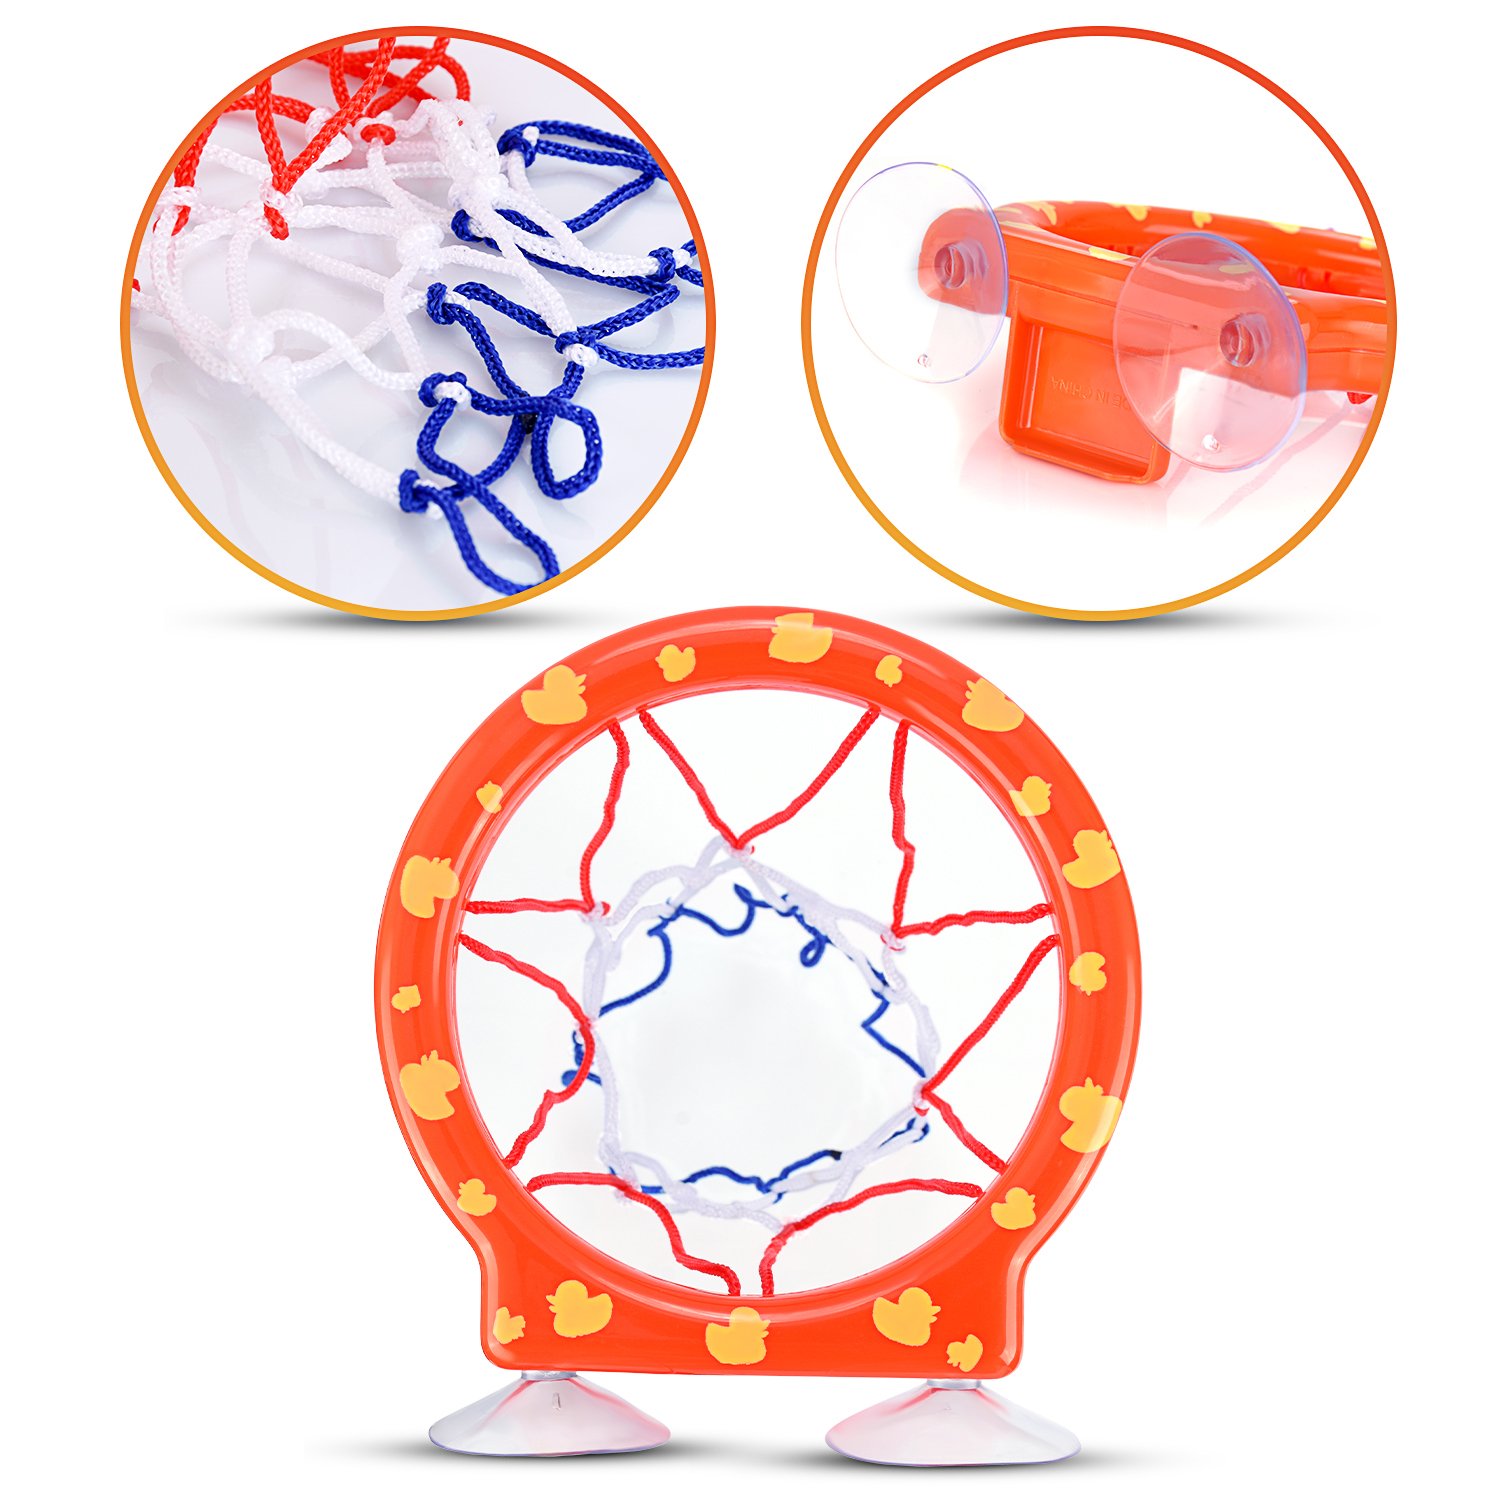 BRITENWAY Bath Toys - Bathtub Basketball Hoop for Kids w/ 3 Balls - BPA Free Plastic Toddler Bath Toys for Boys & Girls - Easy to Set Up Basketball Shooting Game w/Suctions Cups for Flat Surface